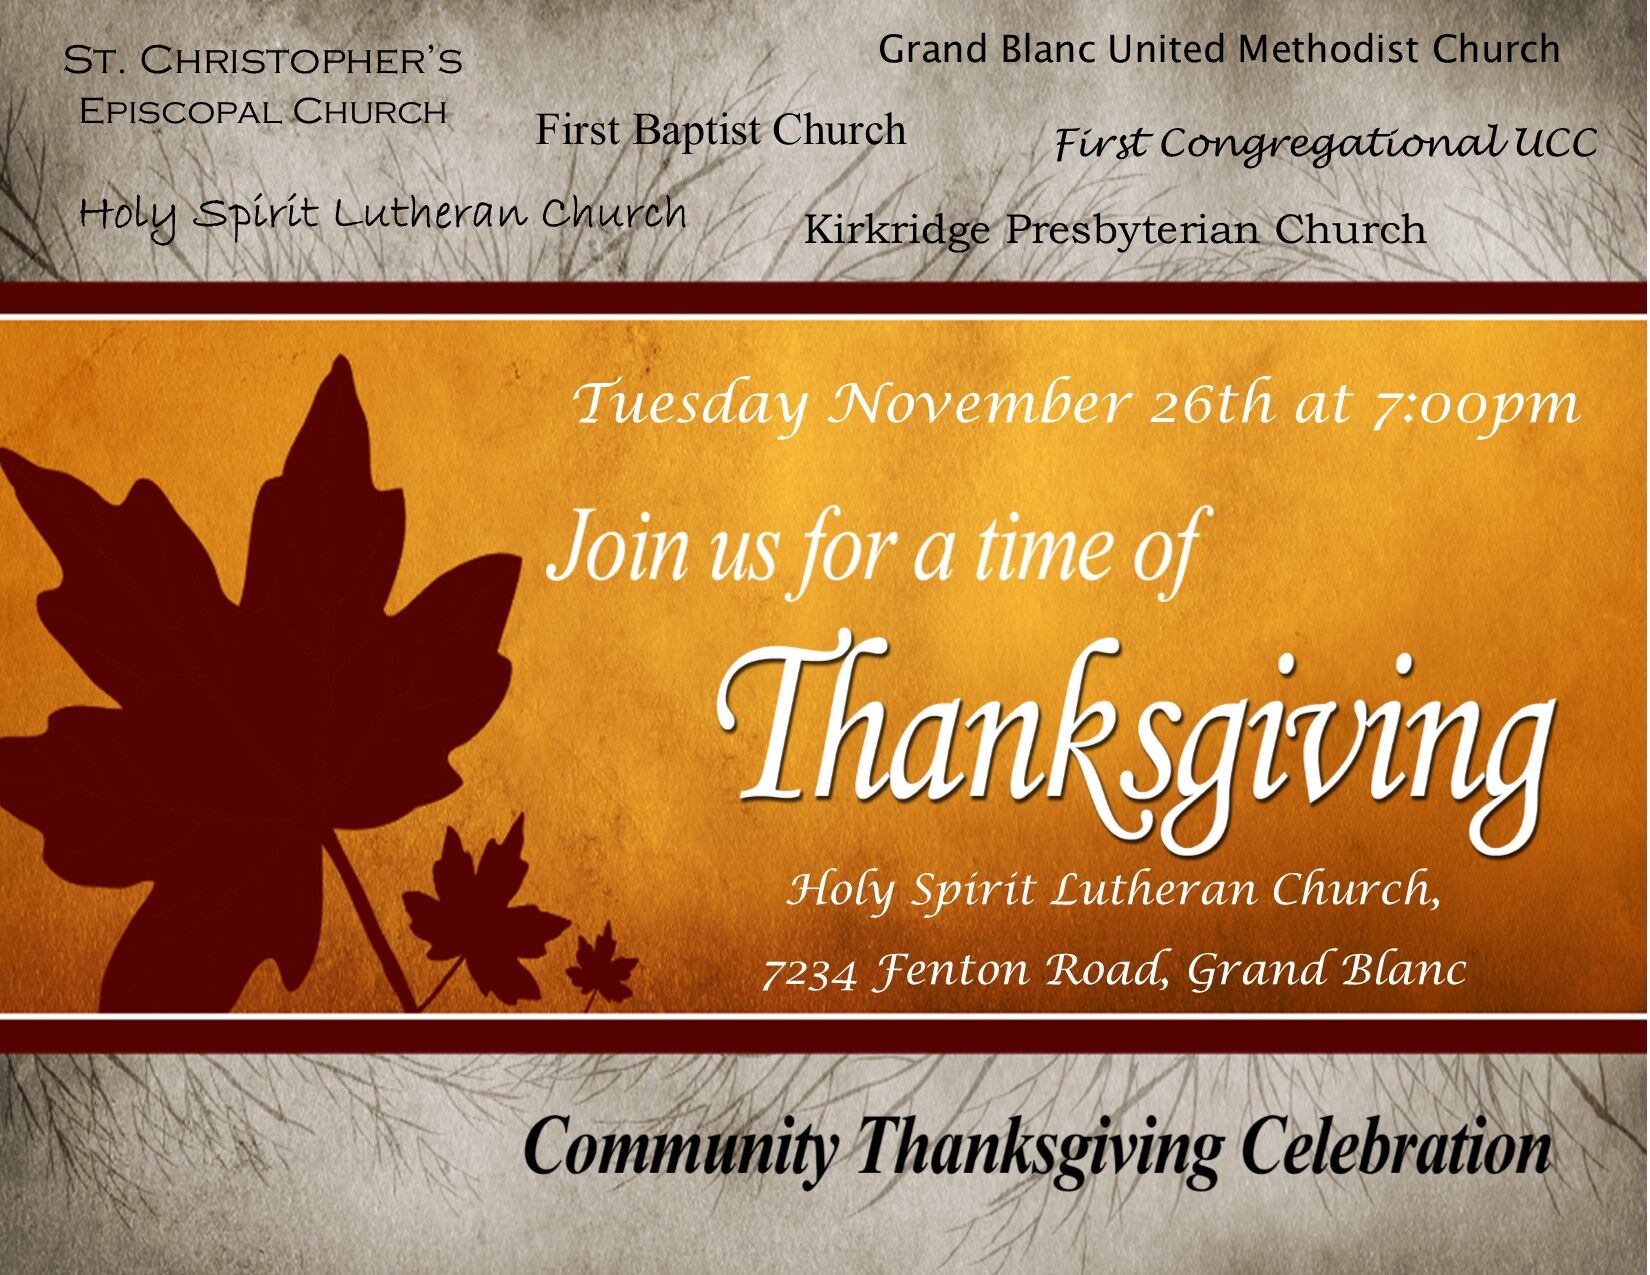 Join us Tuesday evening as we gather as one Grand Blanc faith community. There w...